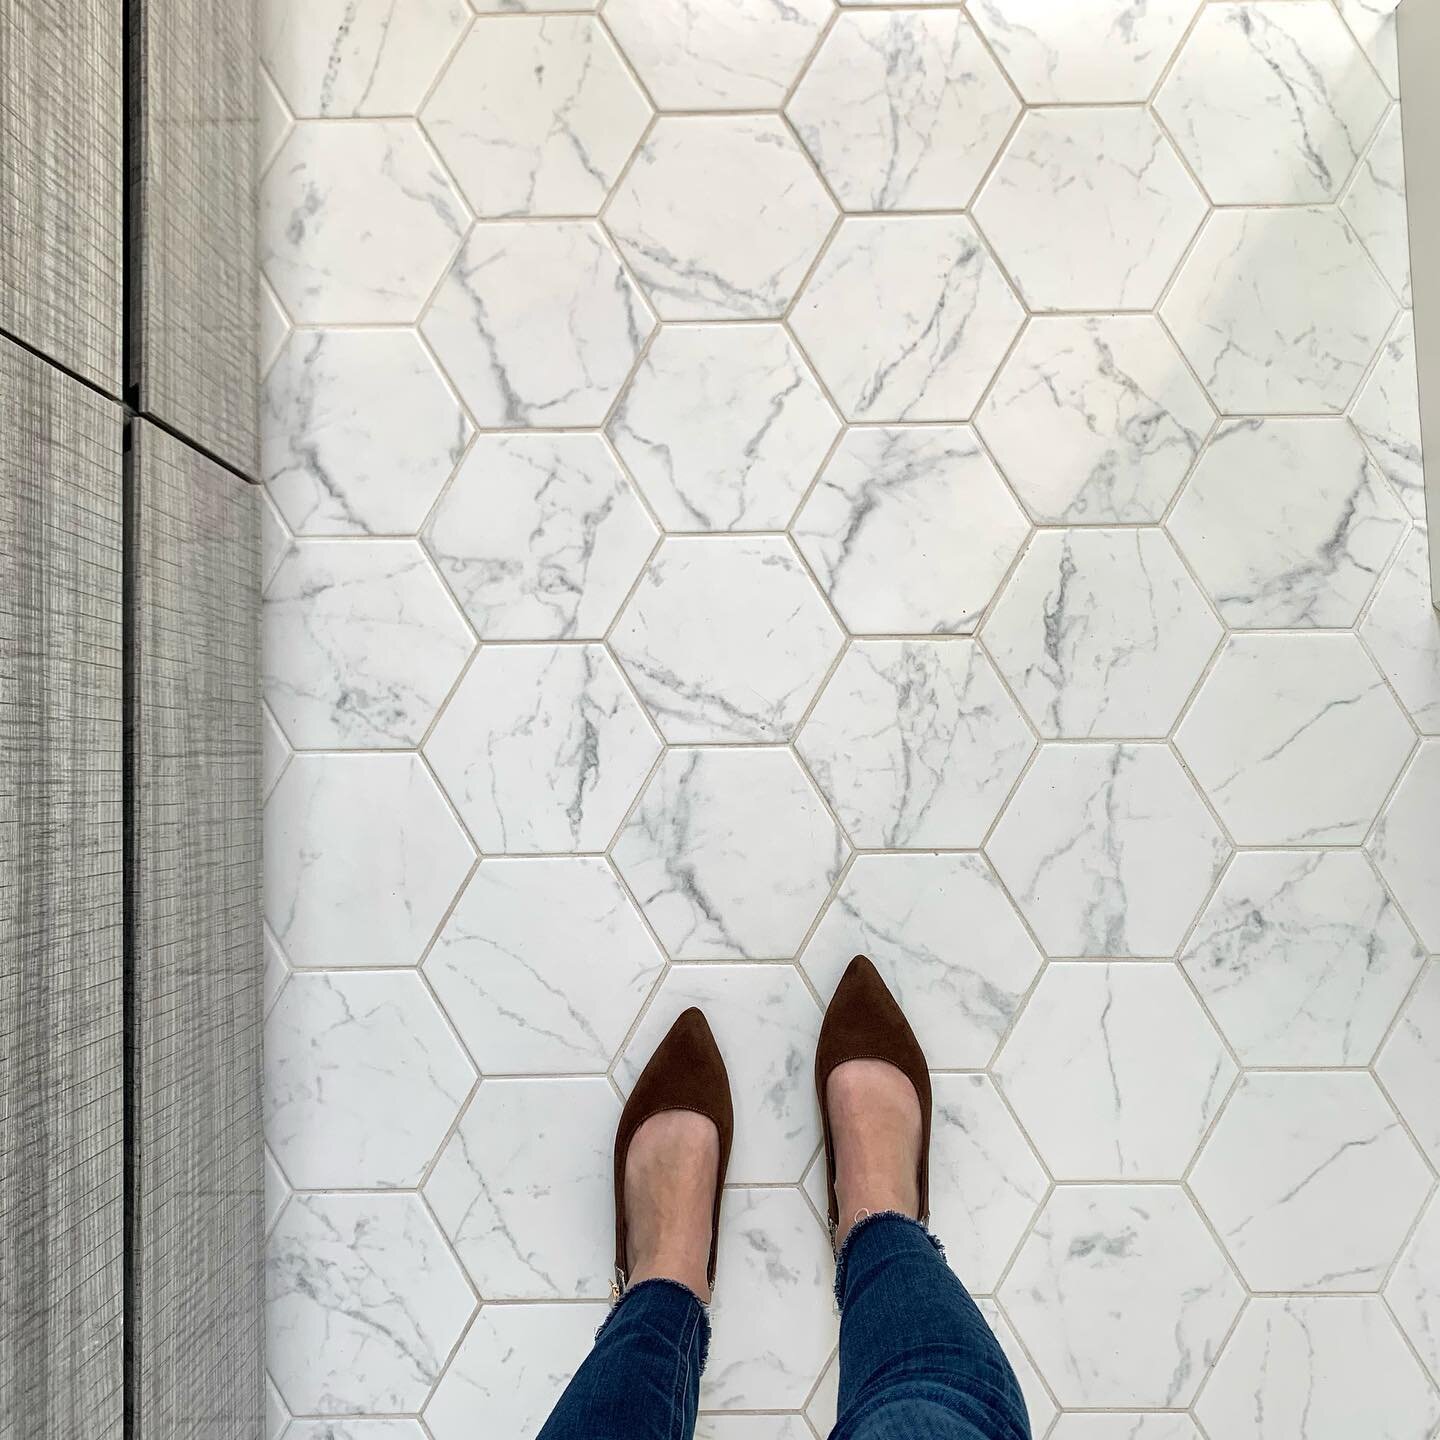 So cool that a 1920s style of hexagon tile is still in style today. 🤩

#tileinspo #realestateslo #downtownslo #hexagontiles #slorealestate #slorealtor #compassagent